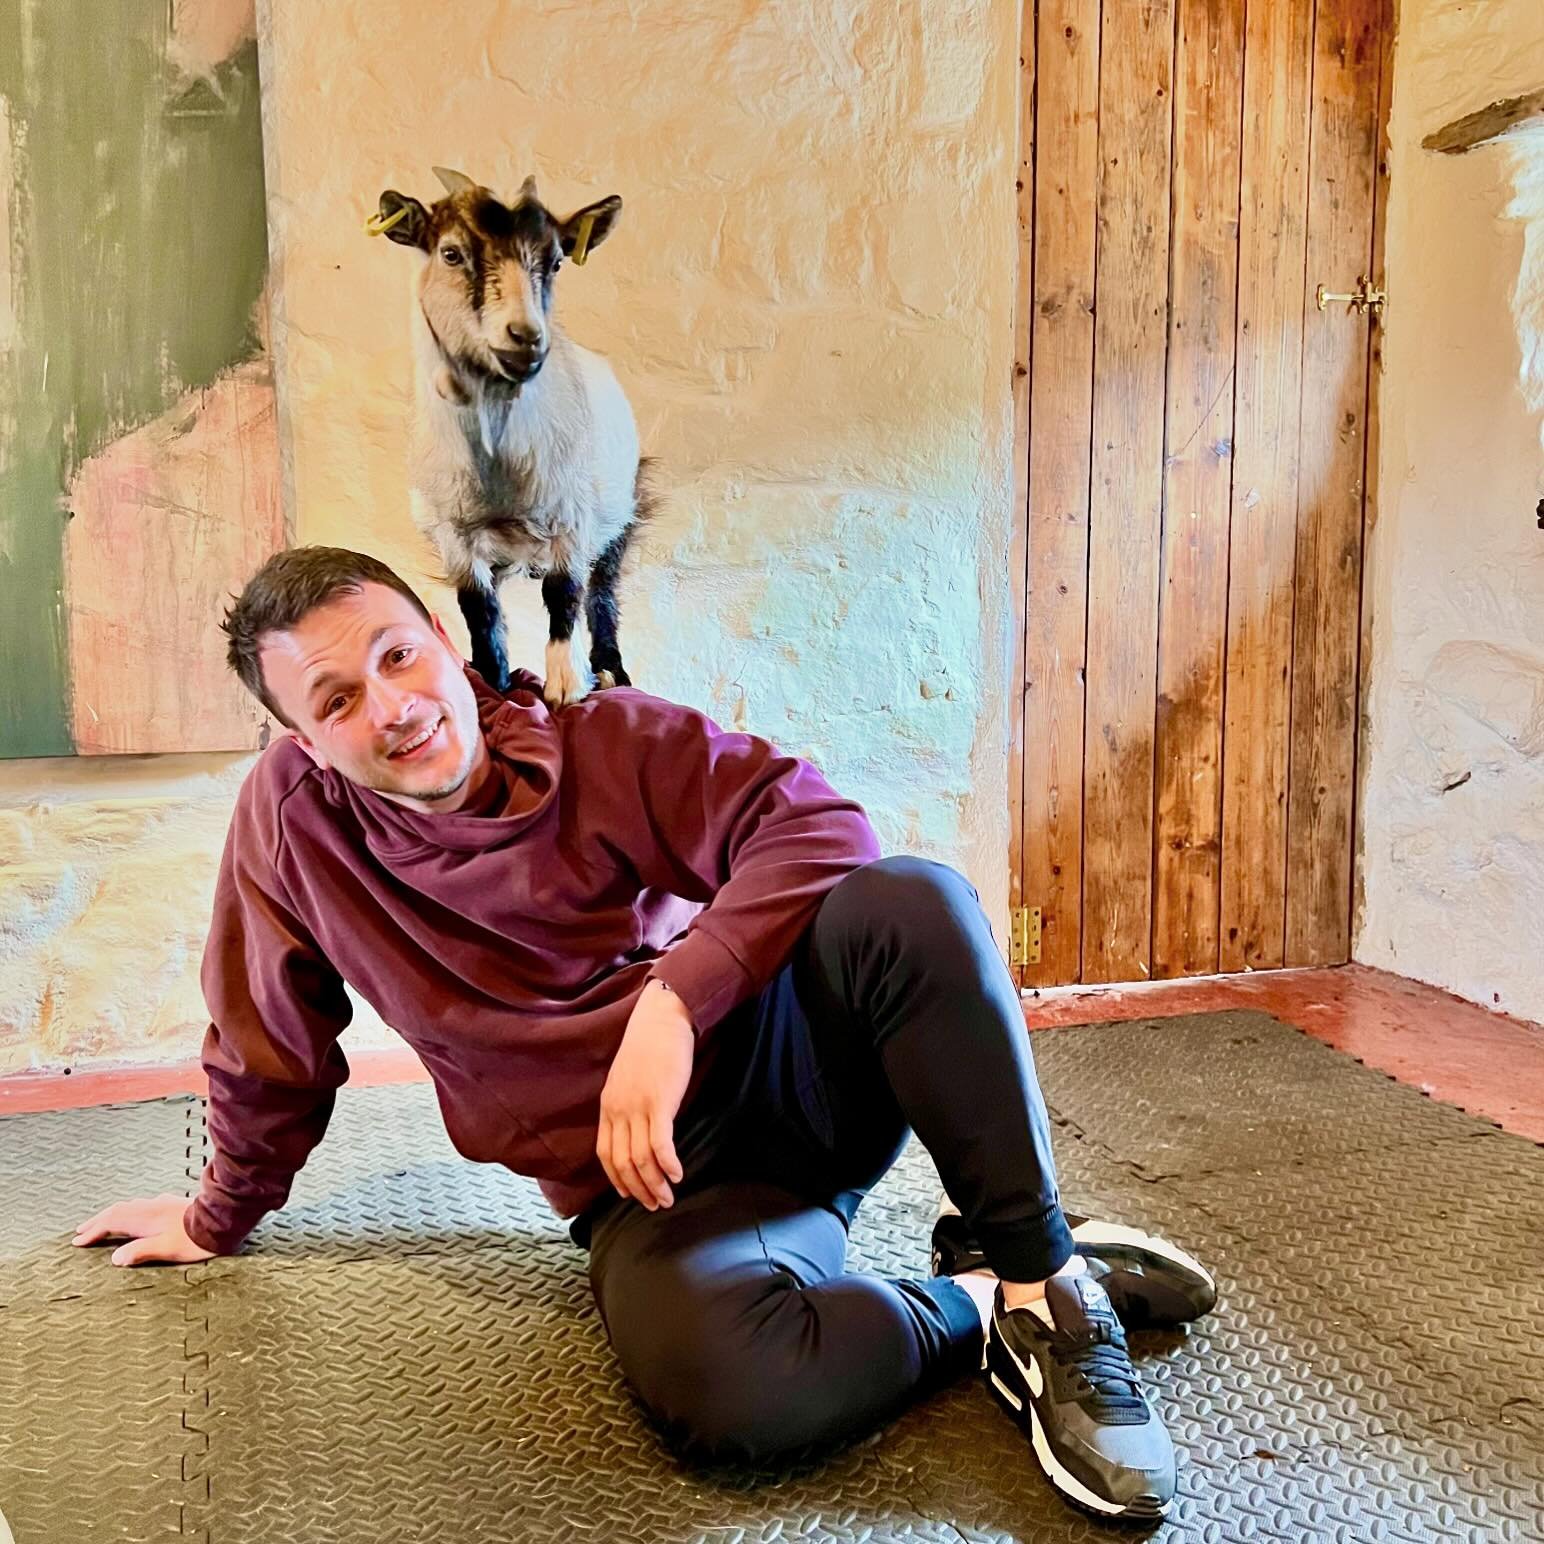 What more could you want than a baby goat sitting on your shoulder? @thepilatesattic 

#goats #goatpilates #pygmygoatpilates #pilates #pygmygoat #goatsofinstagram #scotland #babygoats #goatkids #farmlife #edinburghpilates #fife #pilatesedinburgh #sho